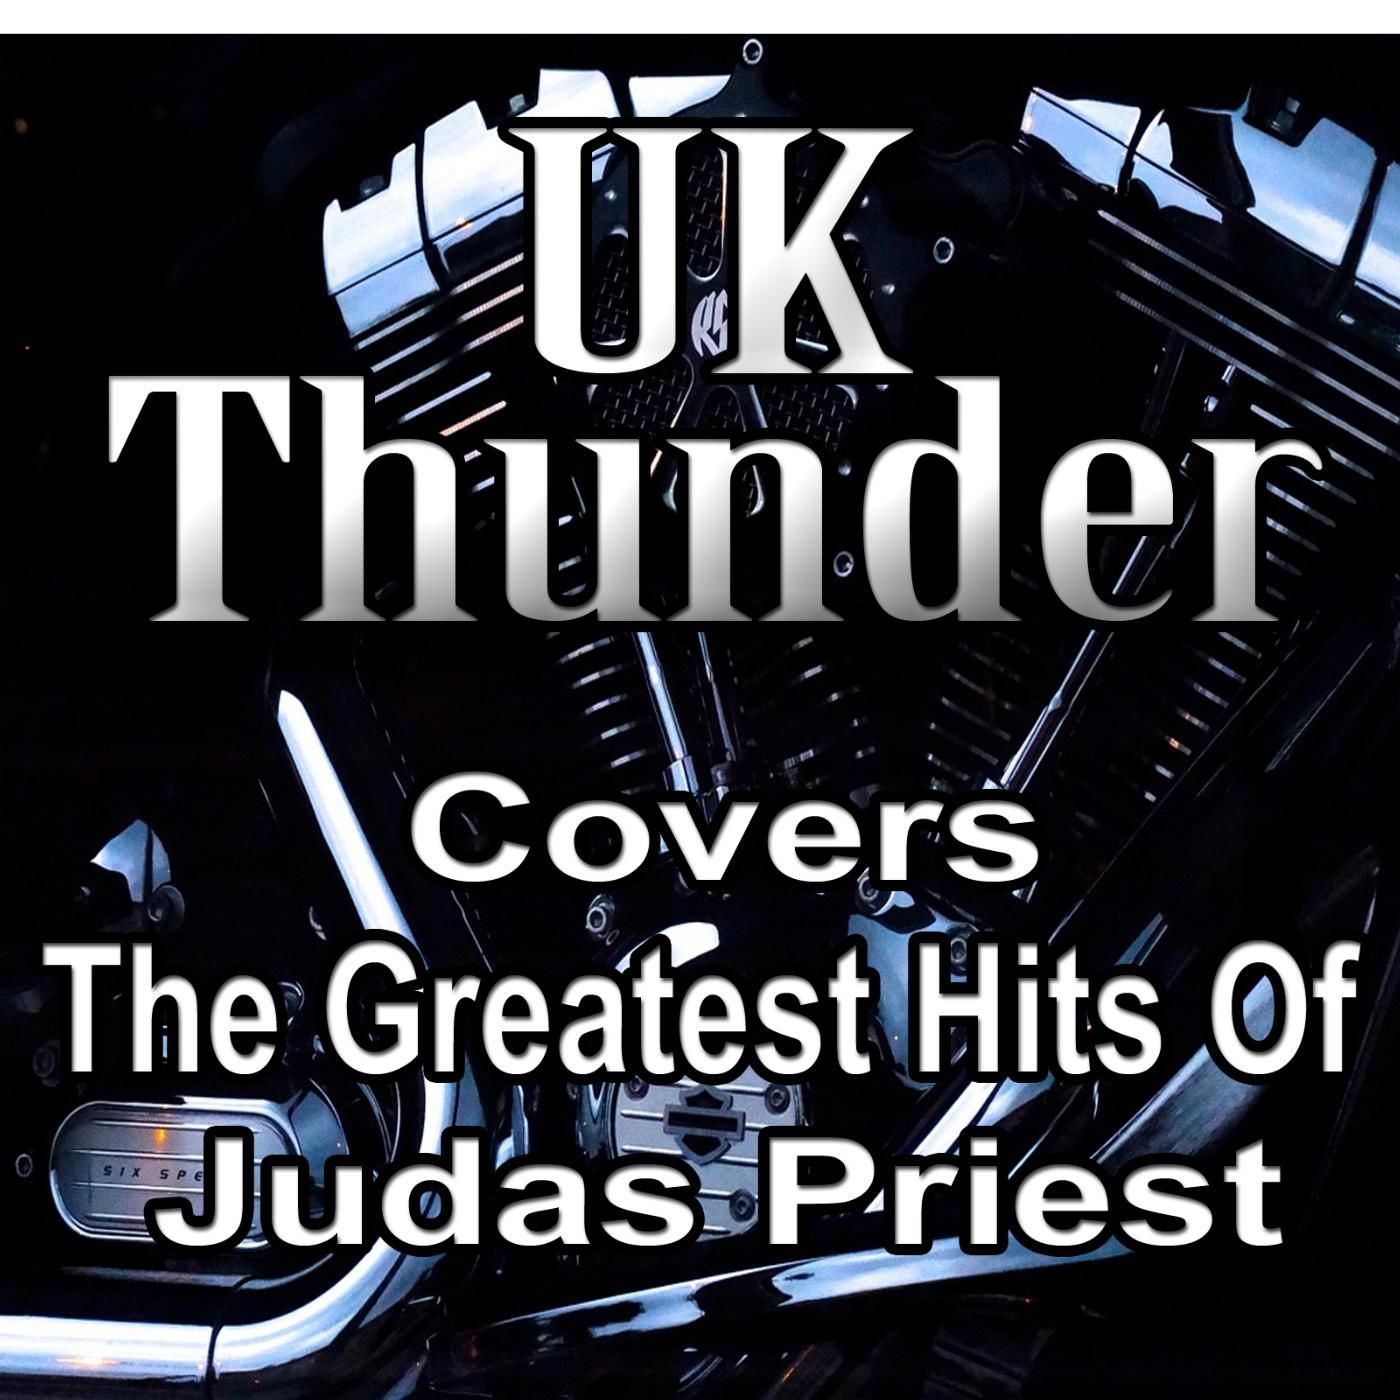 Uk Thunder Covers the Greatest Hits of Judas Priest